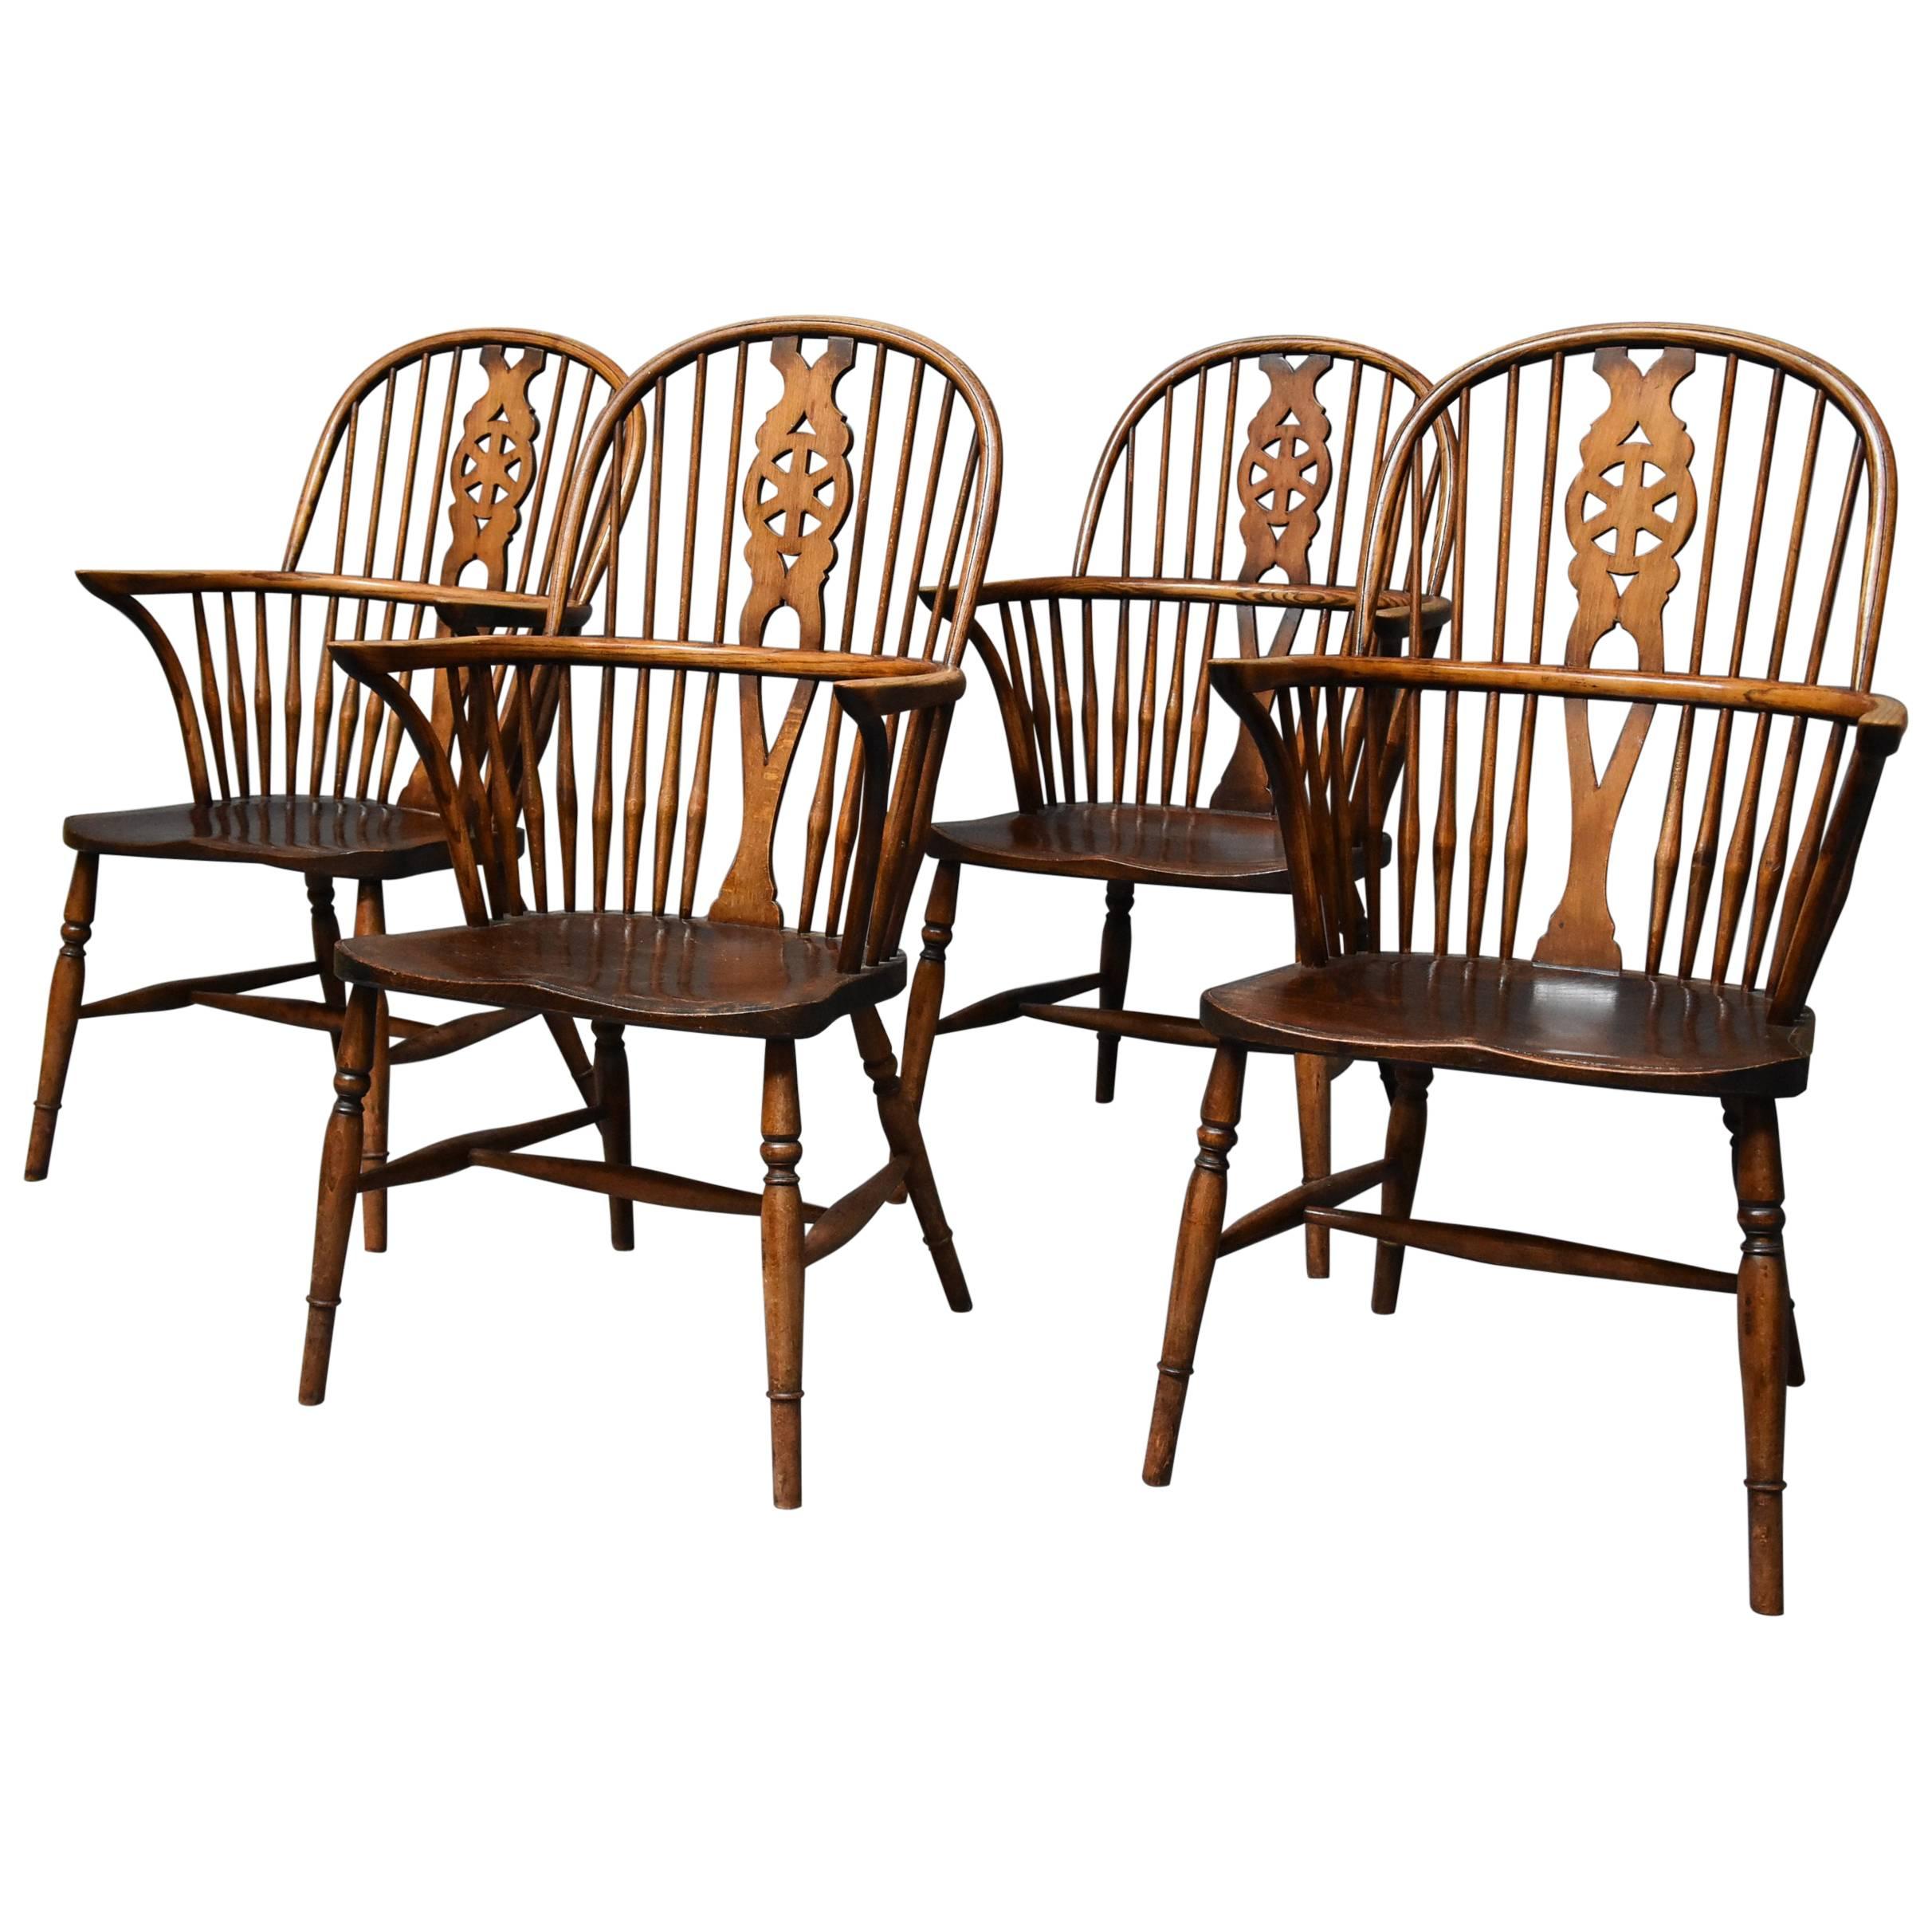 Set of Four Early 20th Century Ash and Elm Wheelback Windsor Chairs For Sale